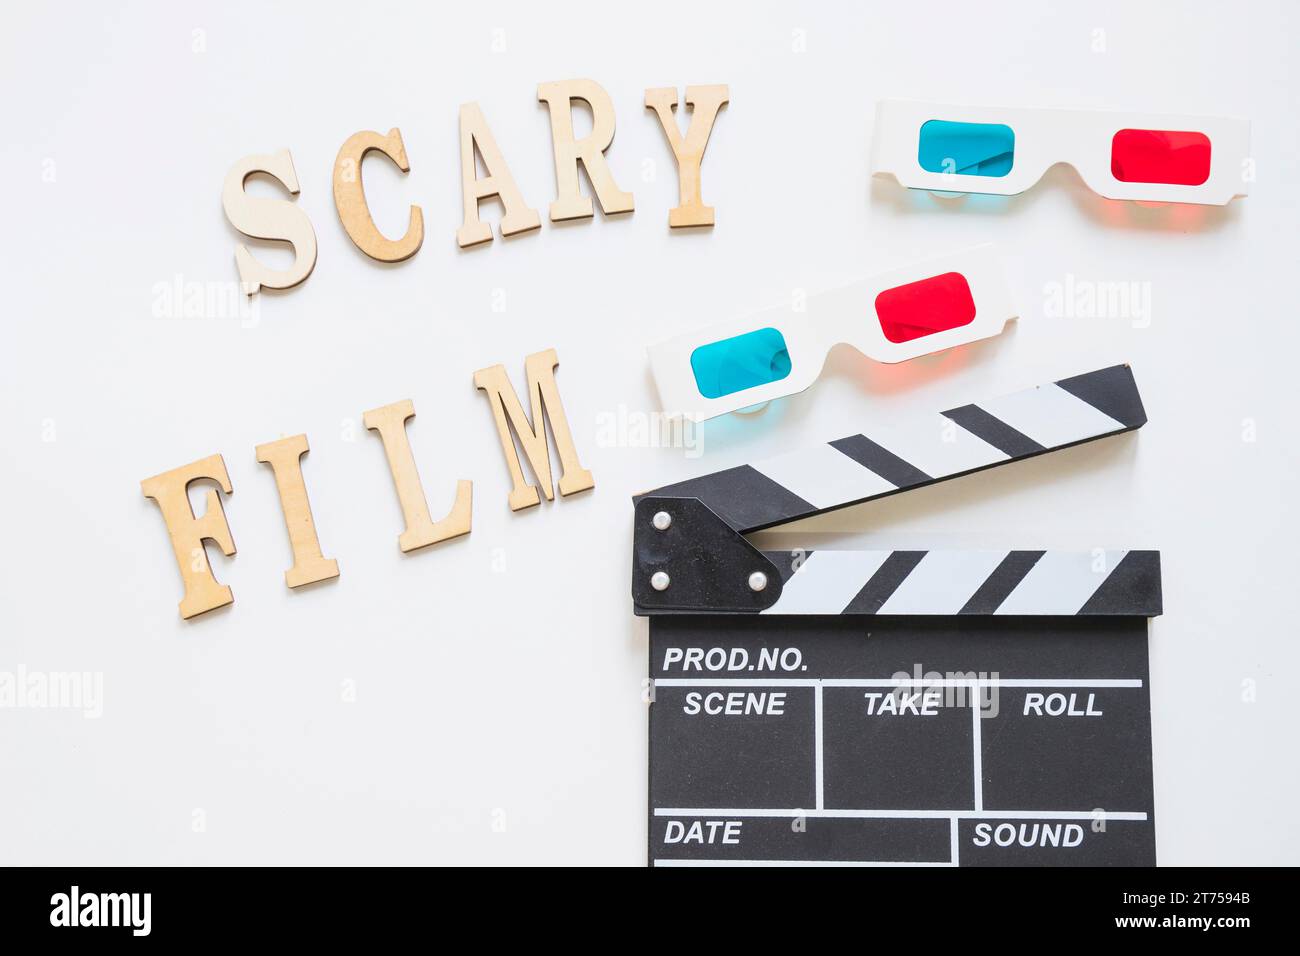 Clapperboard 3d glasses near writing Stock Photo